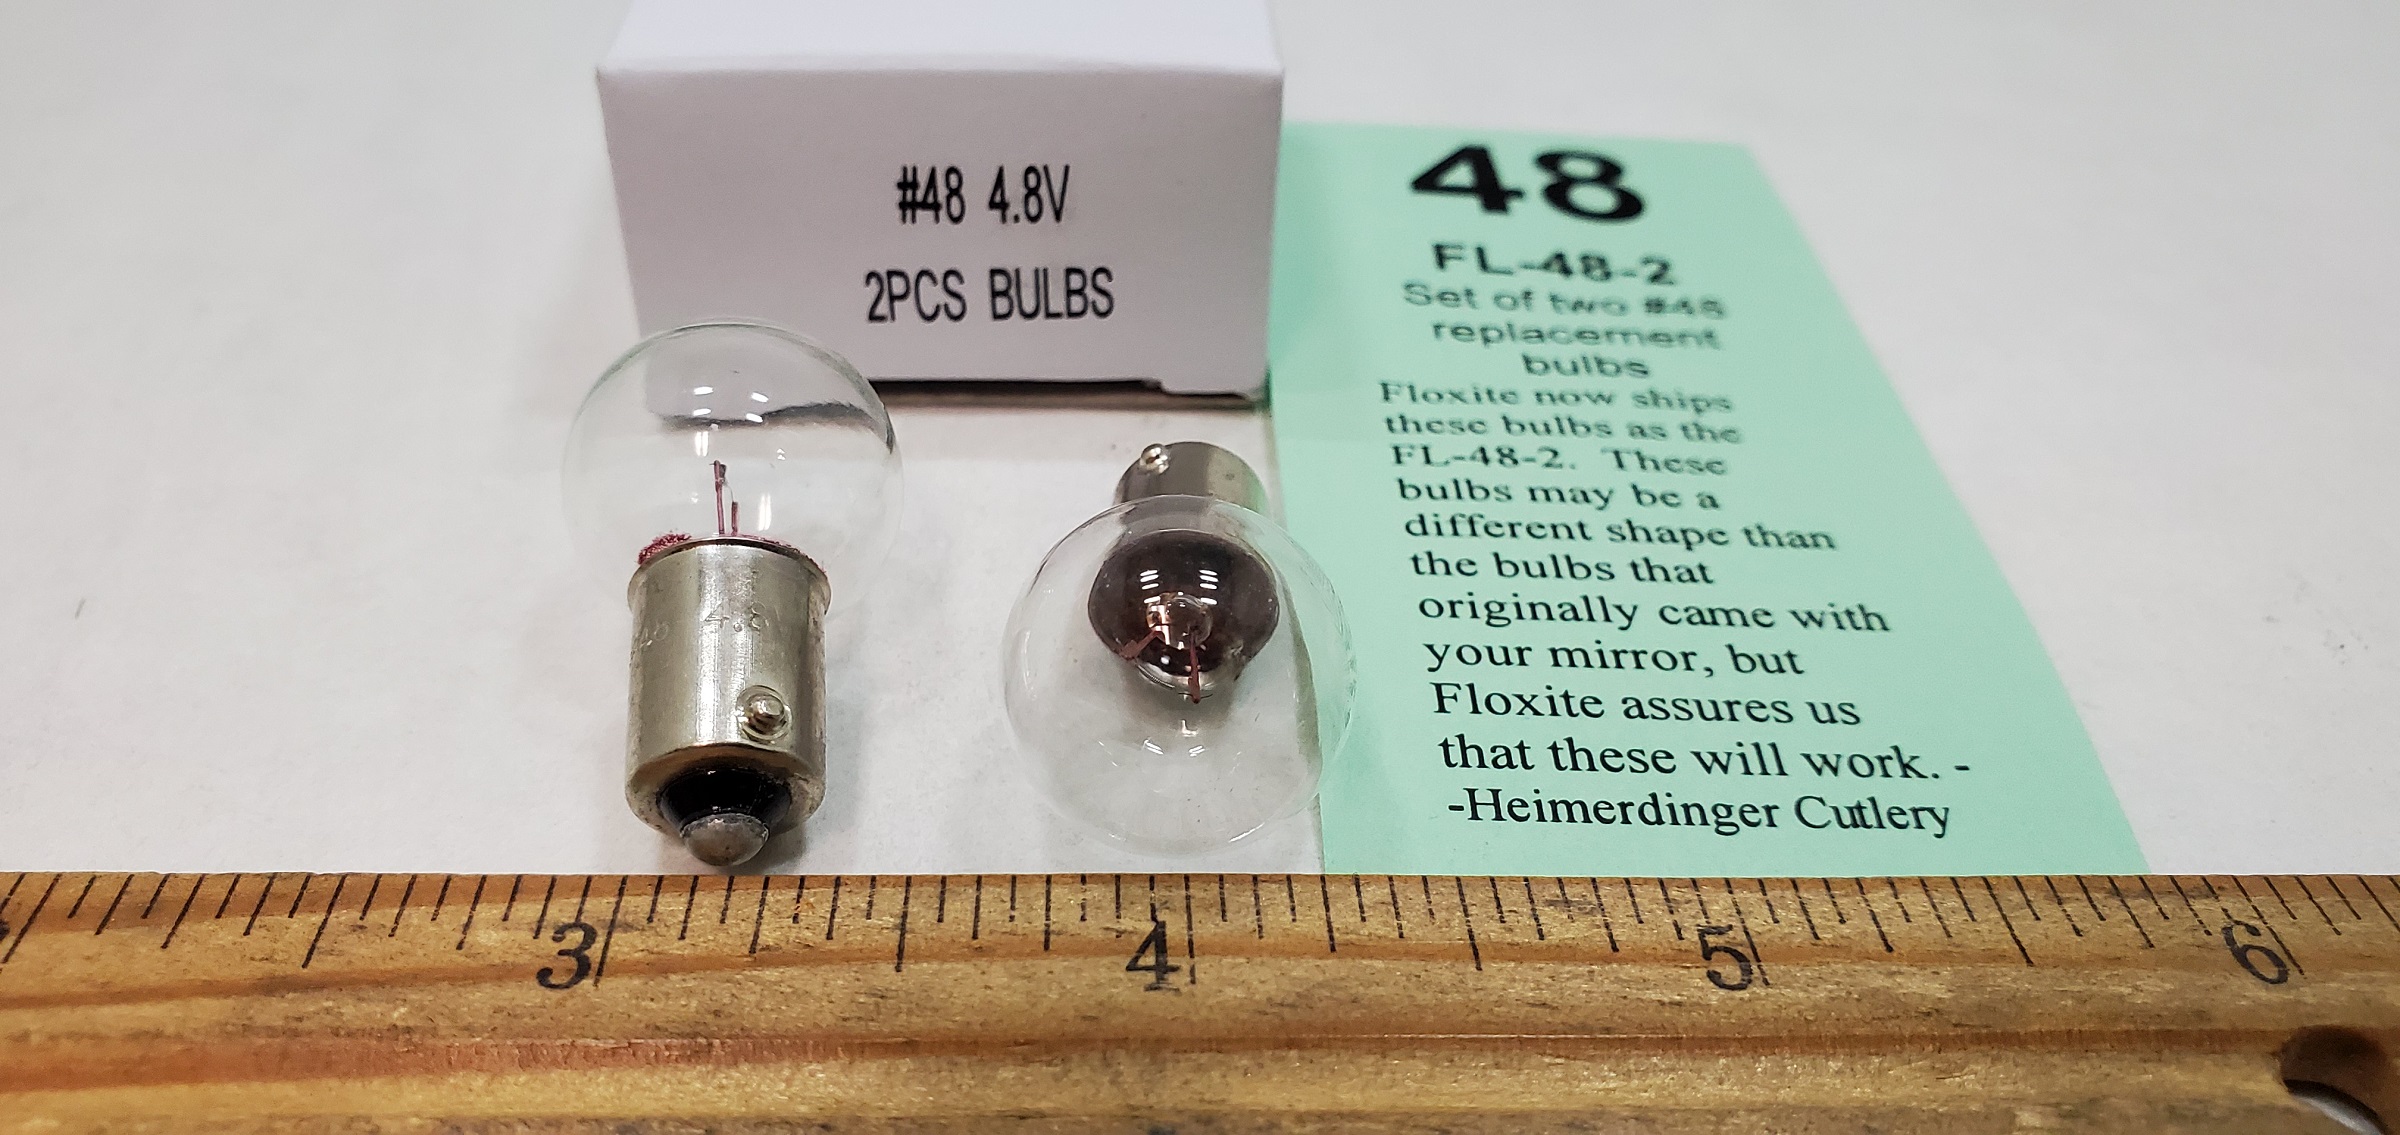 Floxite Fl 48 2 Replacement Bulbs, How To Replace Bulb In Floxite Makeup Mirror